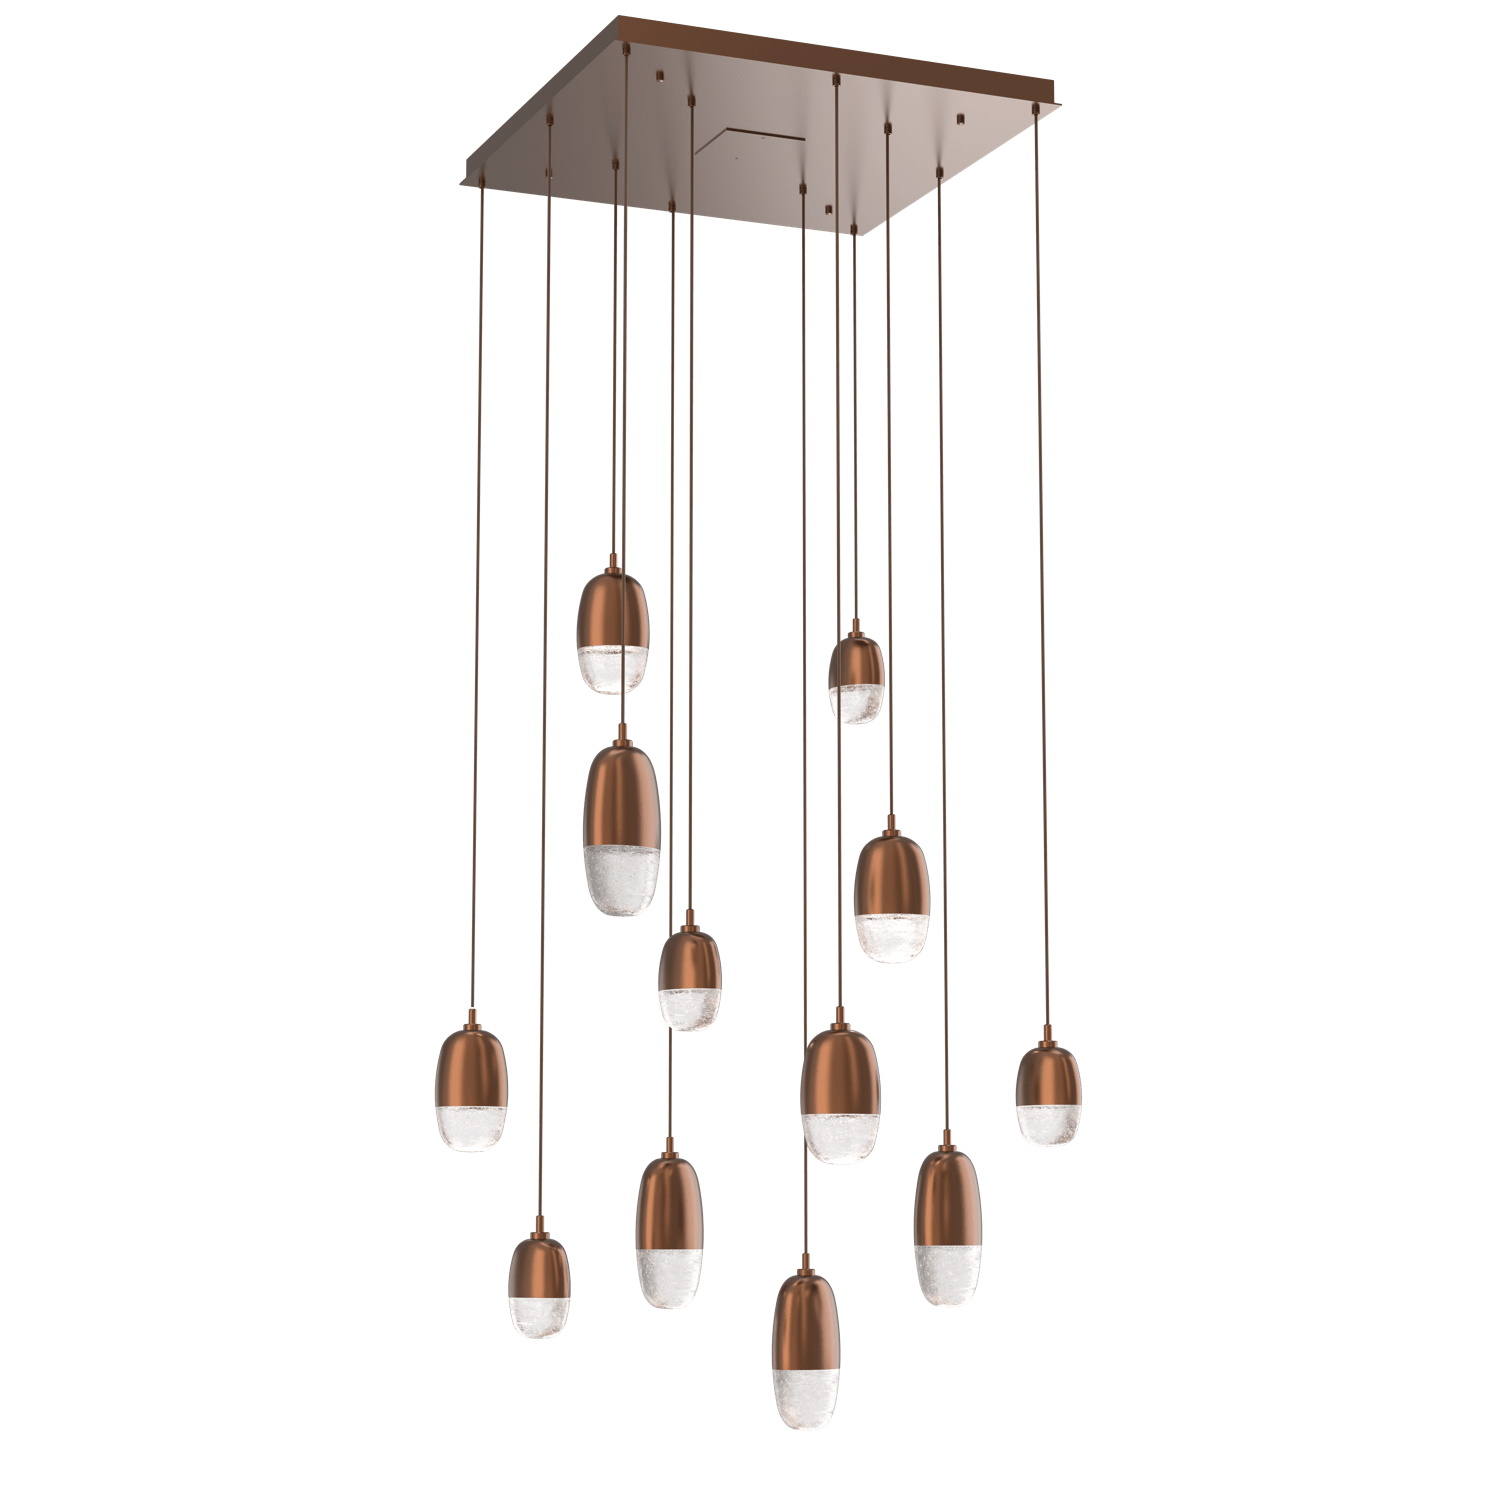 CHB0079-12-BB-Hammerton-Studio-Pebble-12-light-square-pendant-chandelier-with-burnished-bronze-finish-and-clear-cast-glass-shades-and-LED-lamping